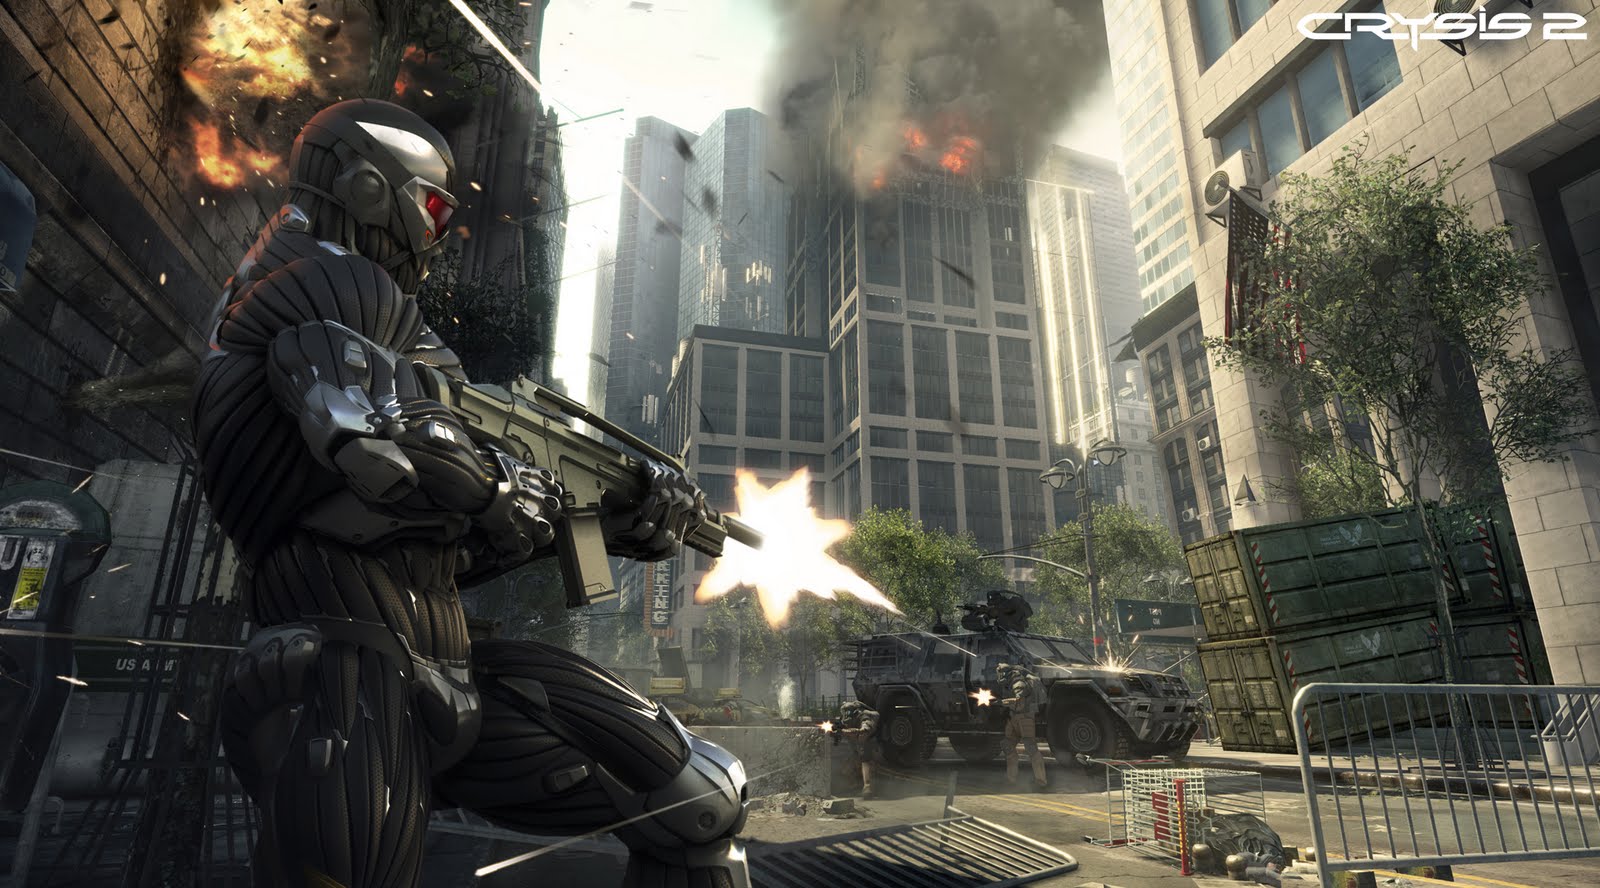 Wallpaper City Crysis Game High Definition Puter